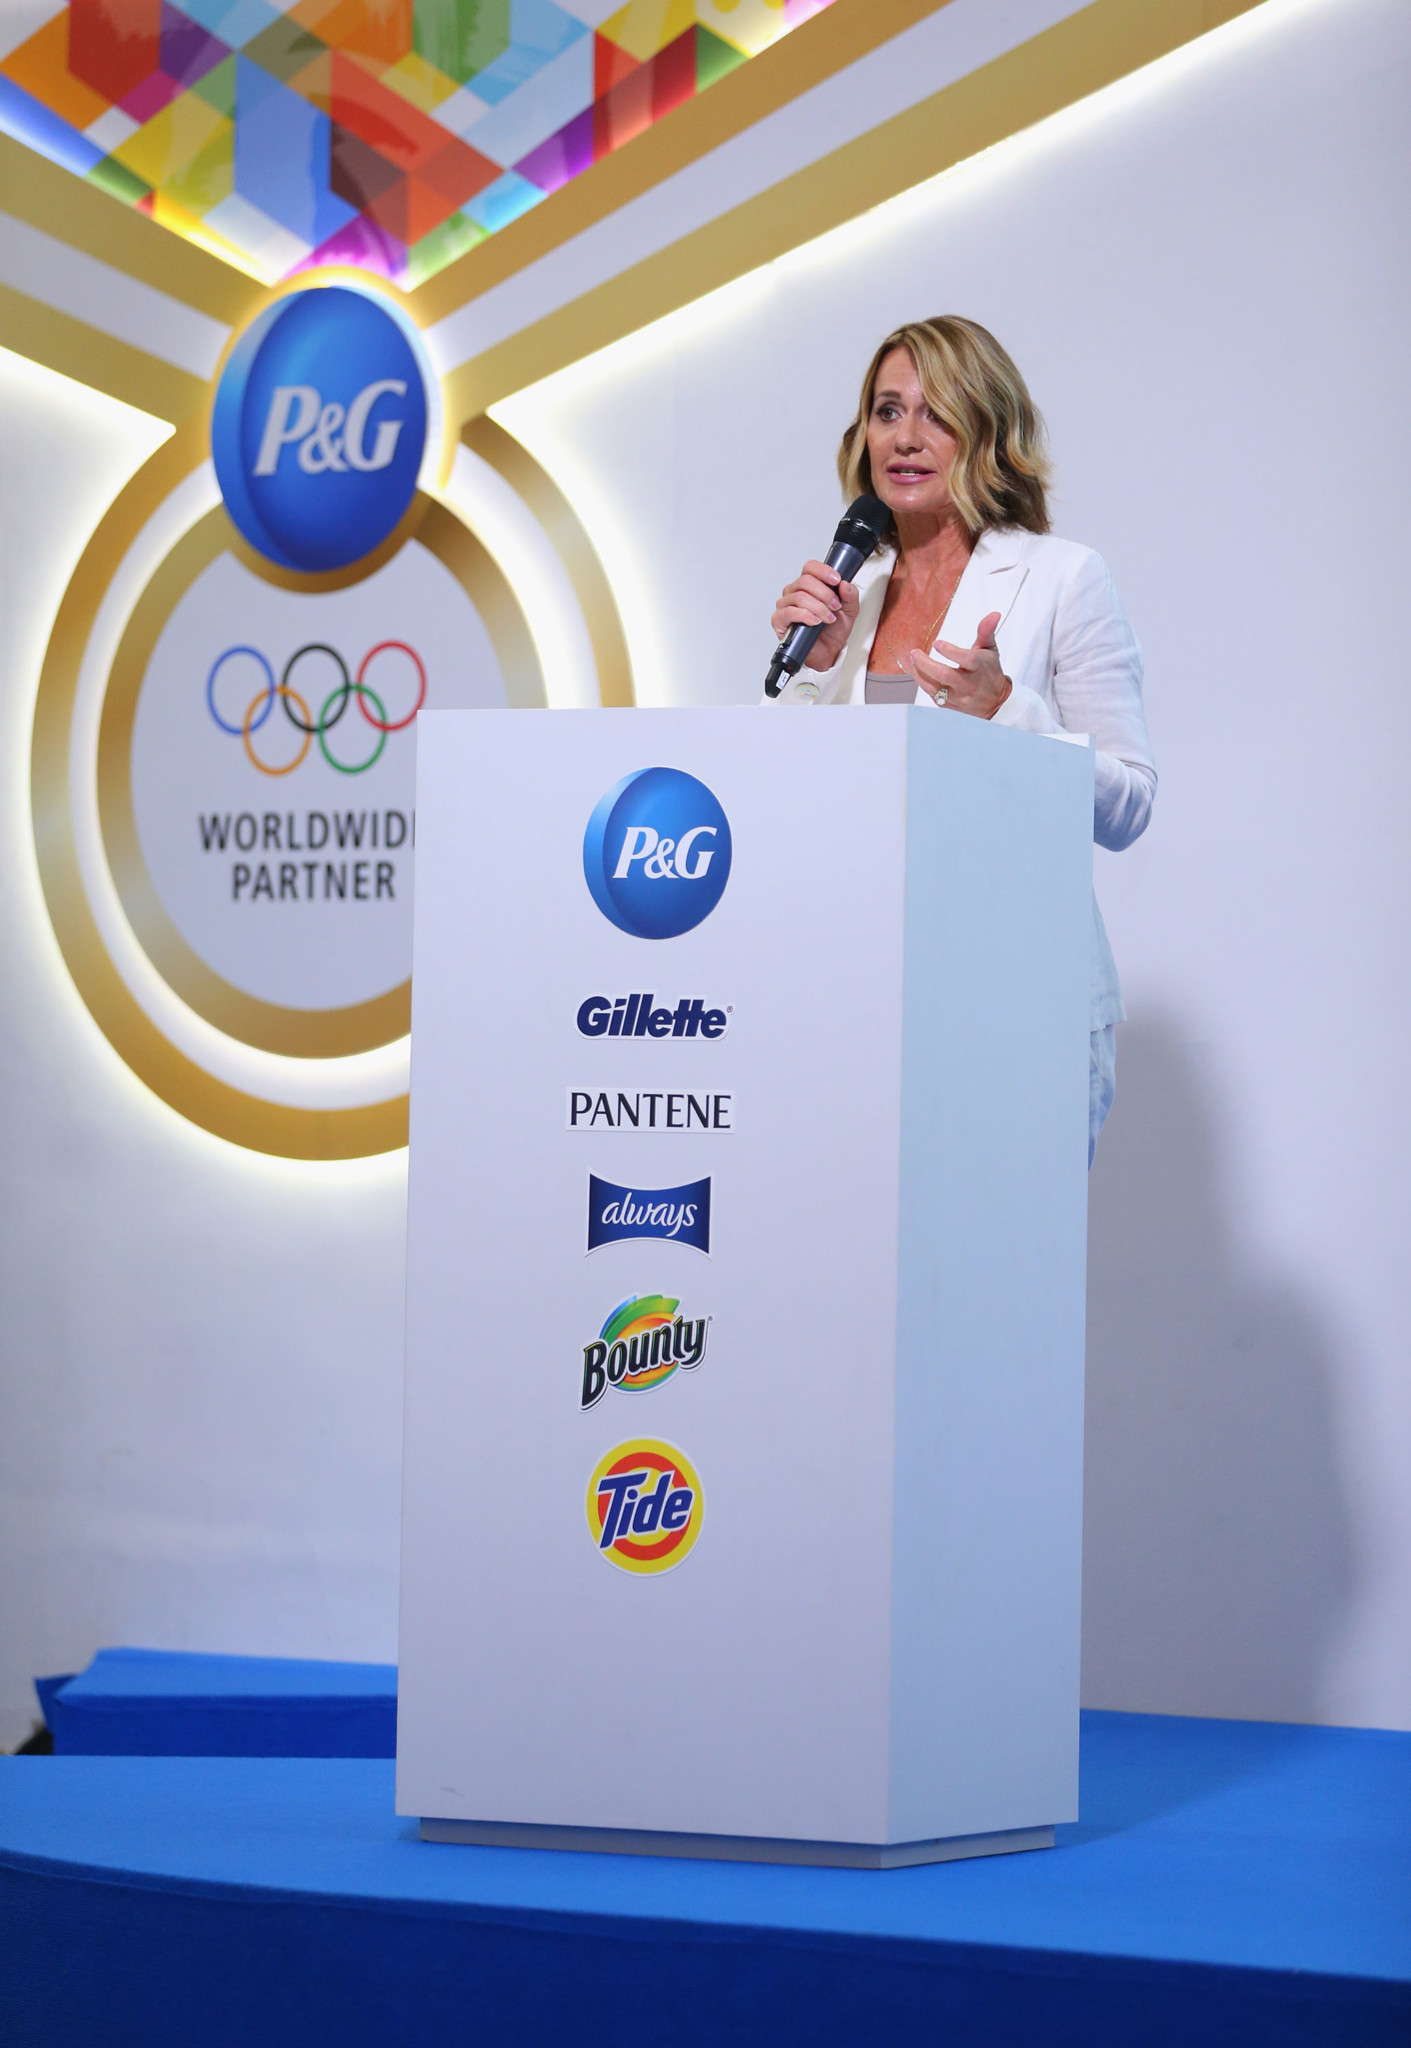 At P&G House on August 4, 2016 in Rio de Janeiro, Brazil.